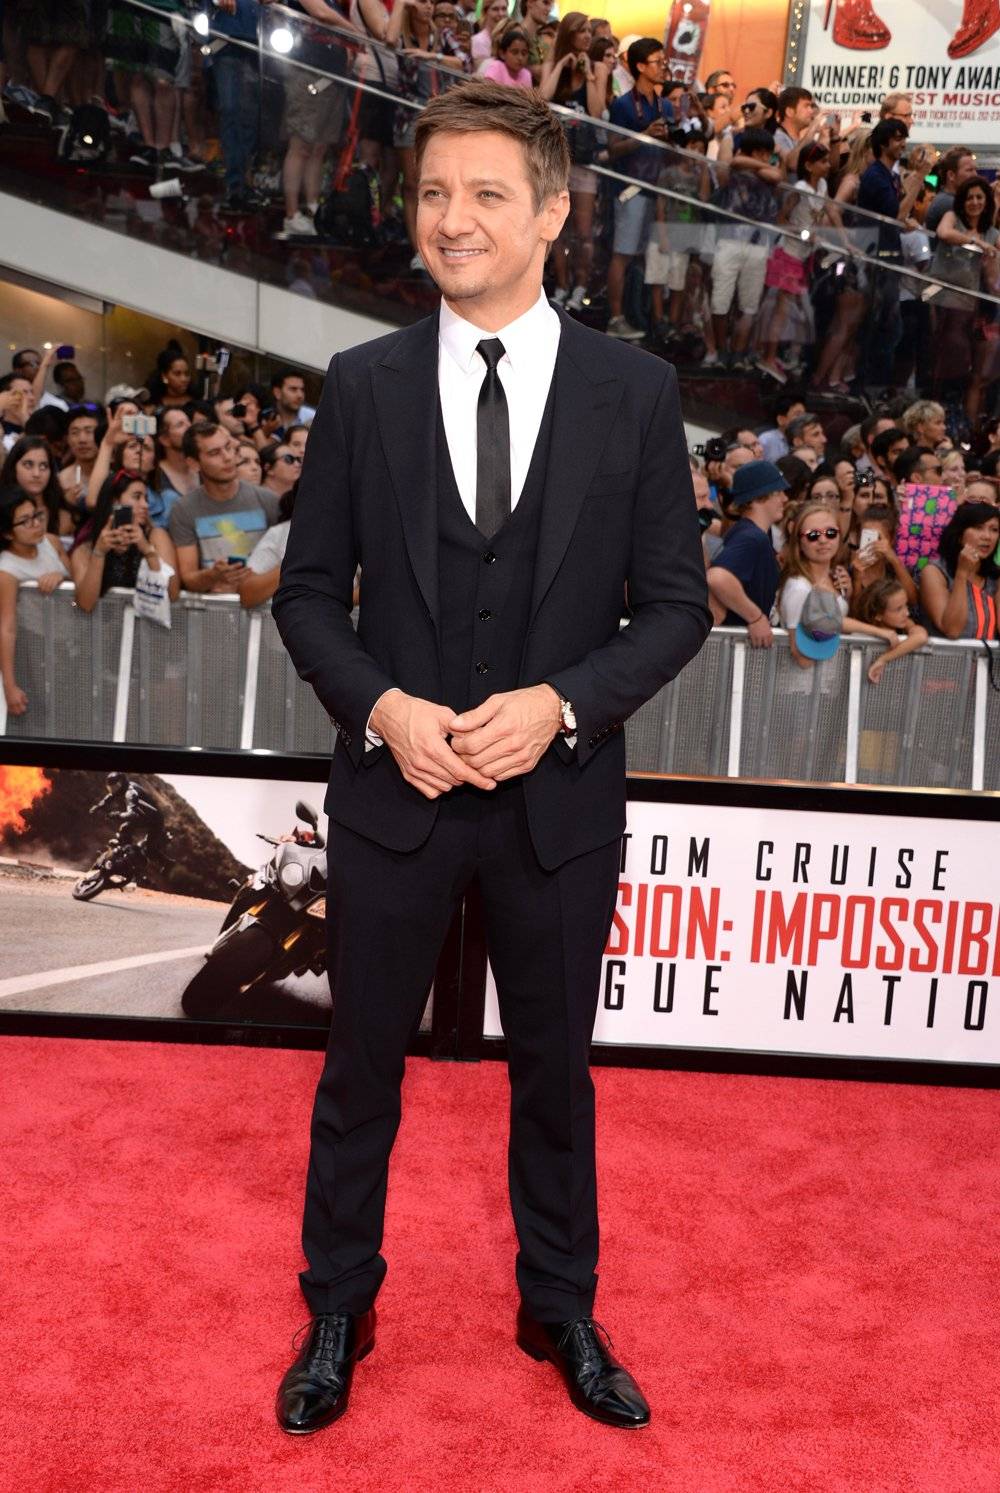 Spotted: Jeremy Renner Wearing The Jaeger-LeCoultre Master Ultra Thin Tourbillon During The Premiere of Mission: Impossible — Rogue Nation